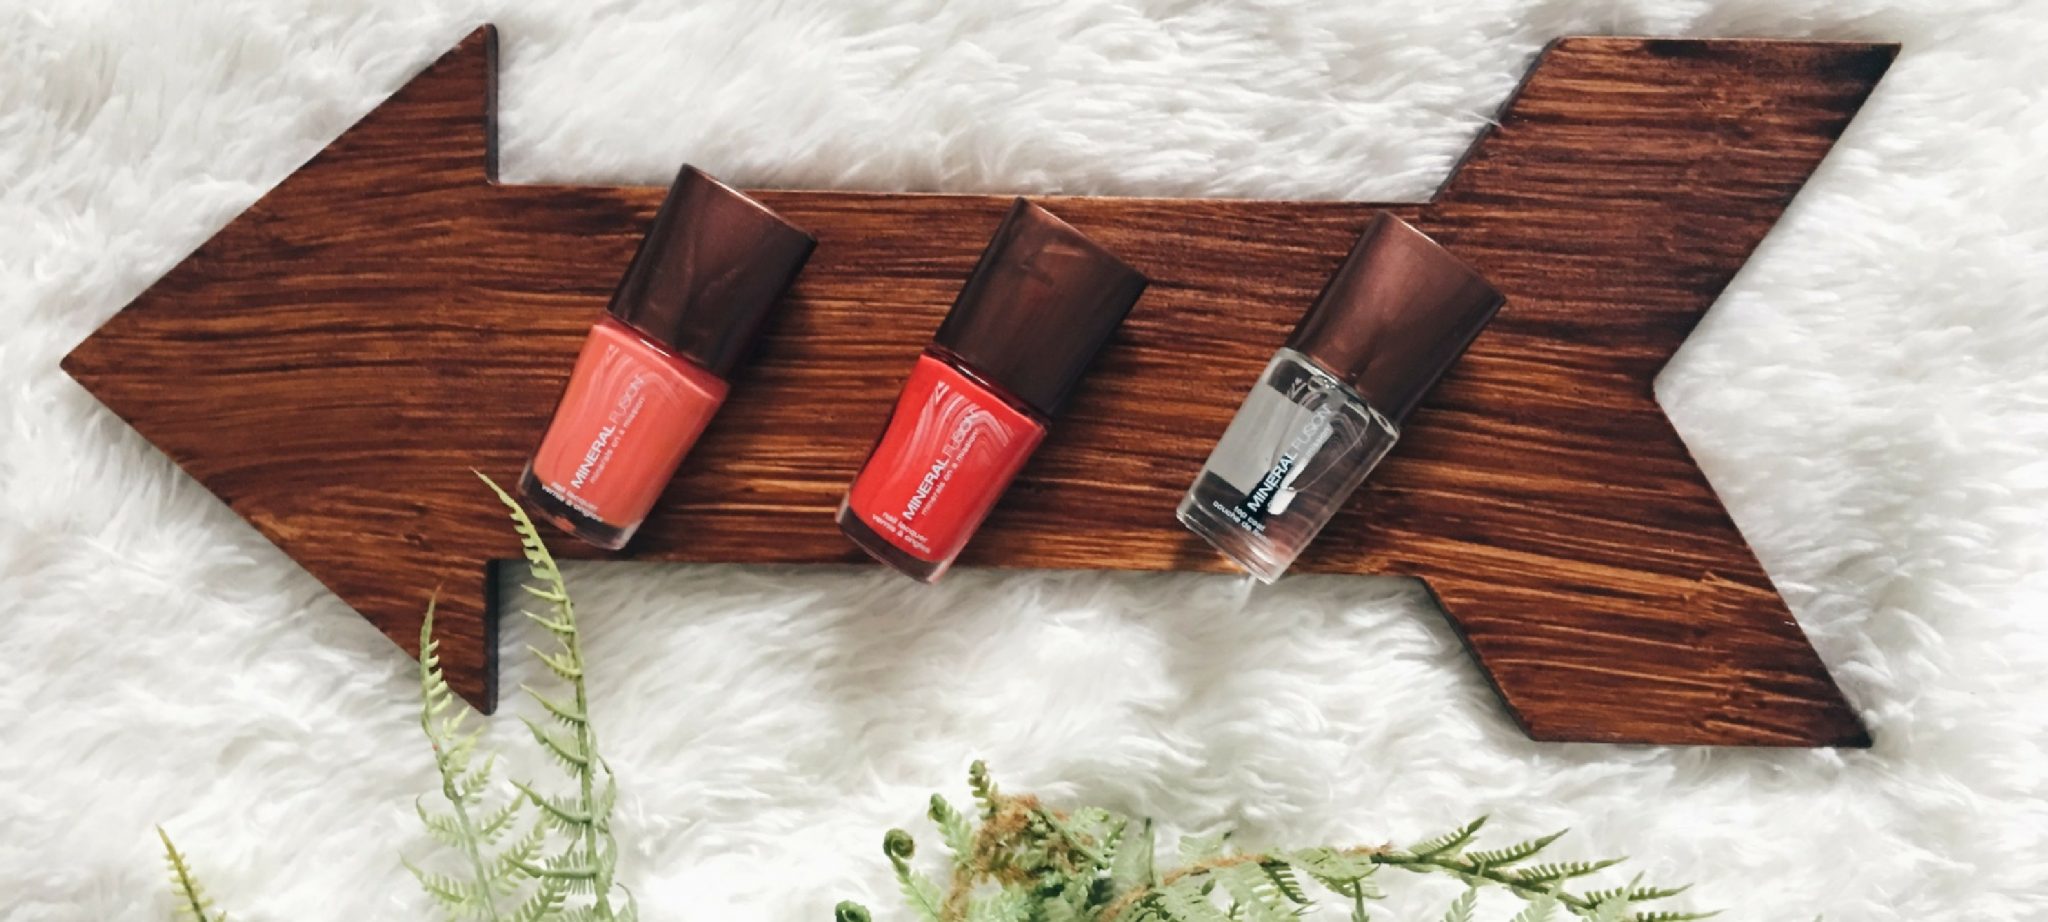 “Free” & Non-Toxic Nail Polish: 20 Days of Sustainable Living Tips